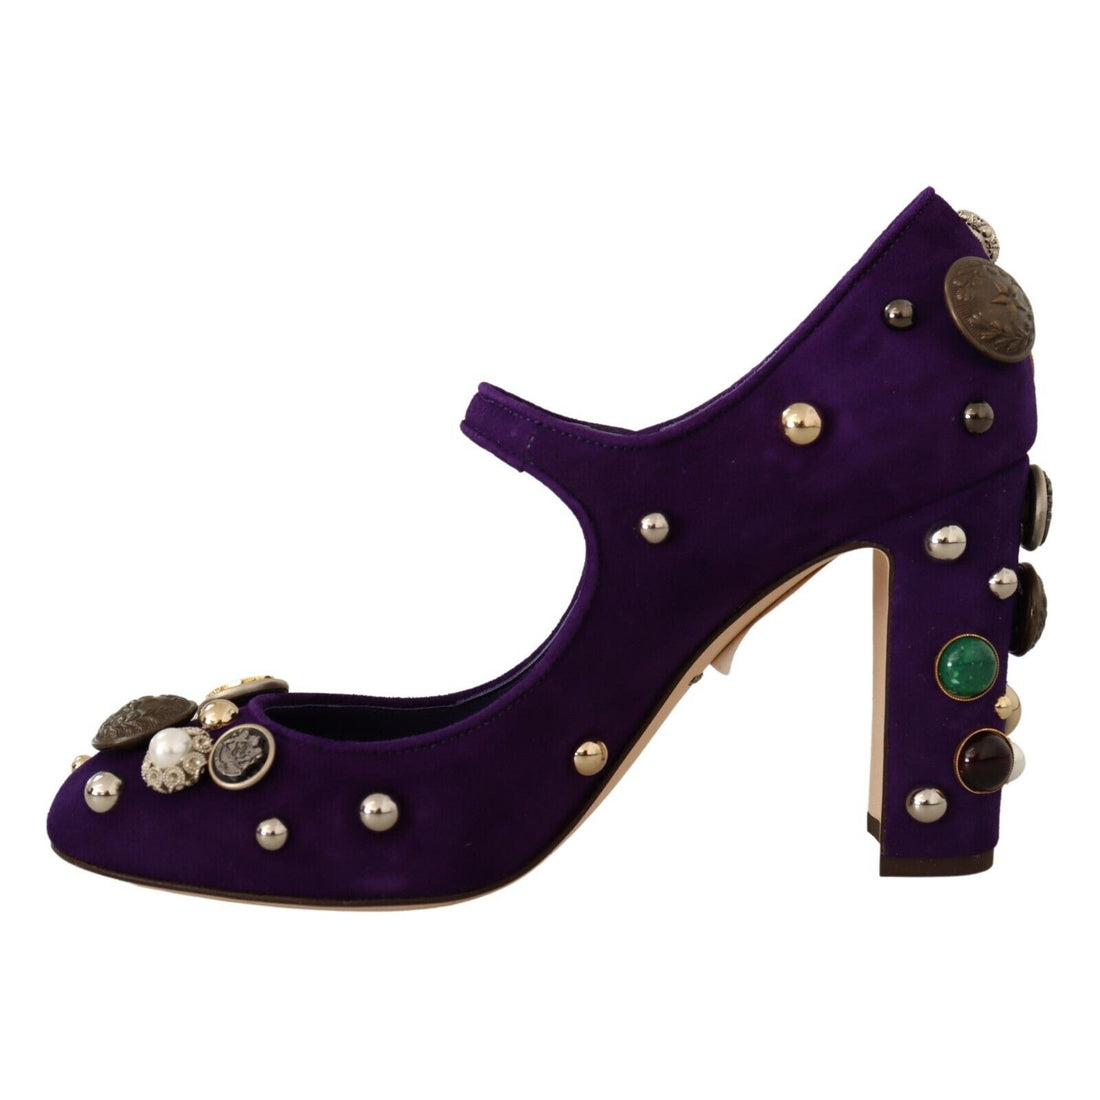 Dolce & Gabbana Purple Suede Embellished Pump Mary Jane Shoes - Paris Deluxe